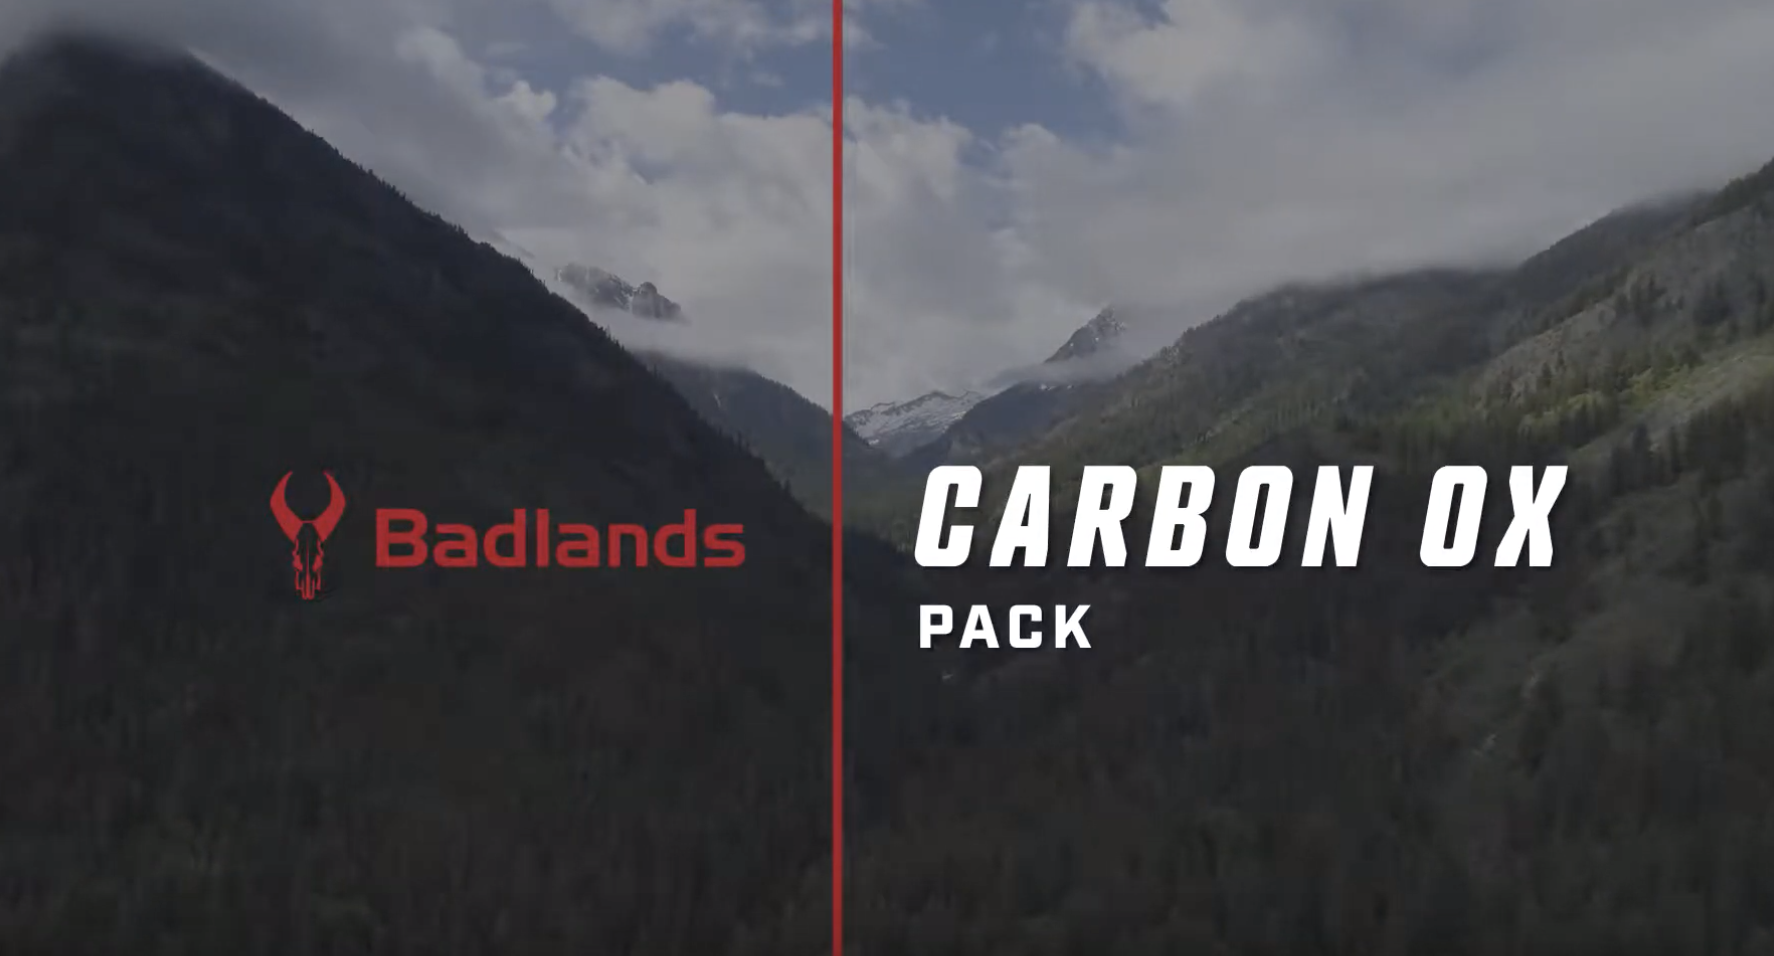 Learn more about the Carbon Ox Pack